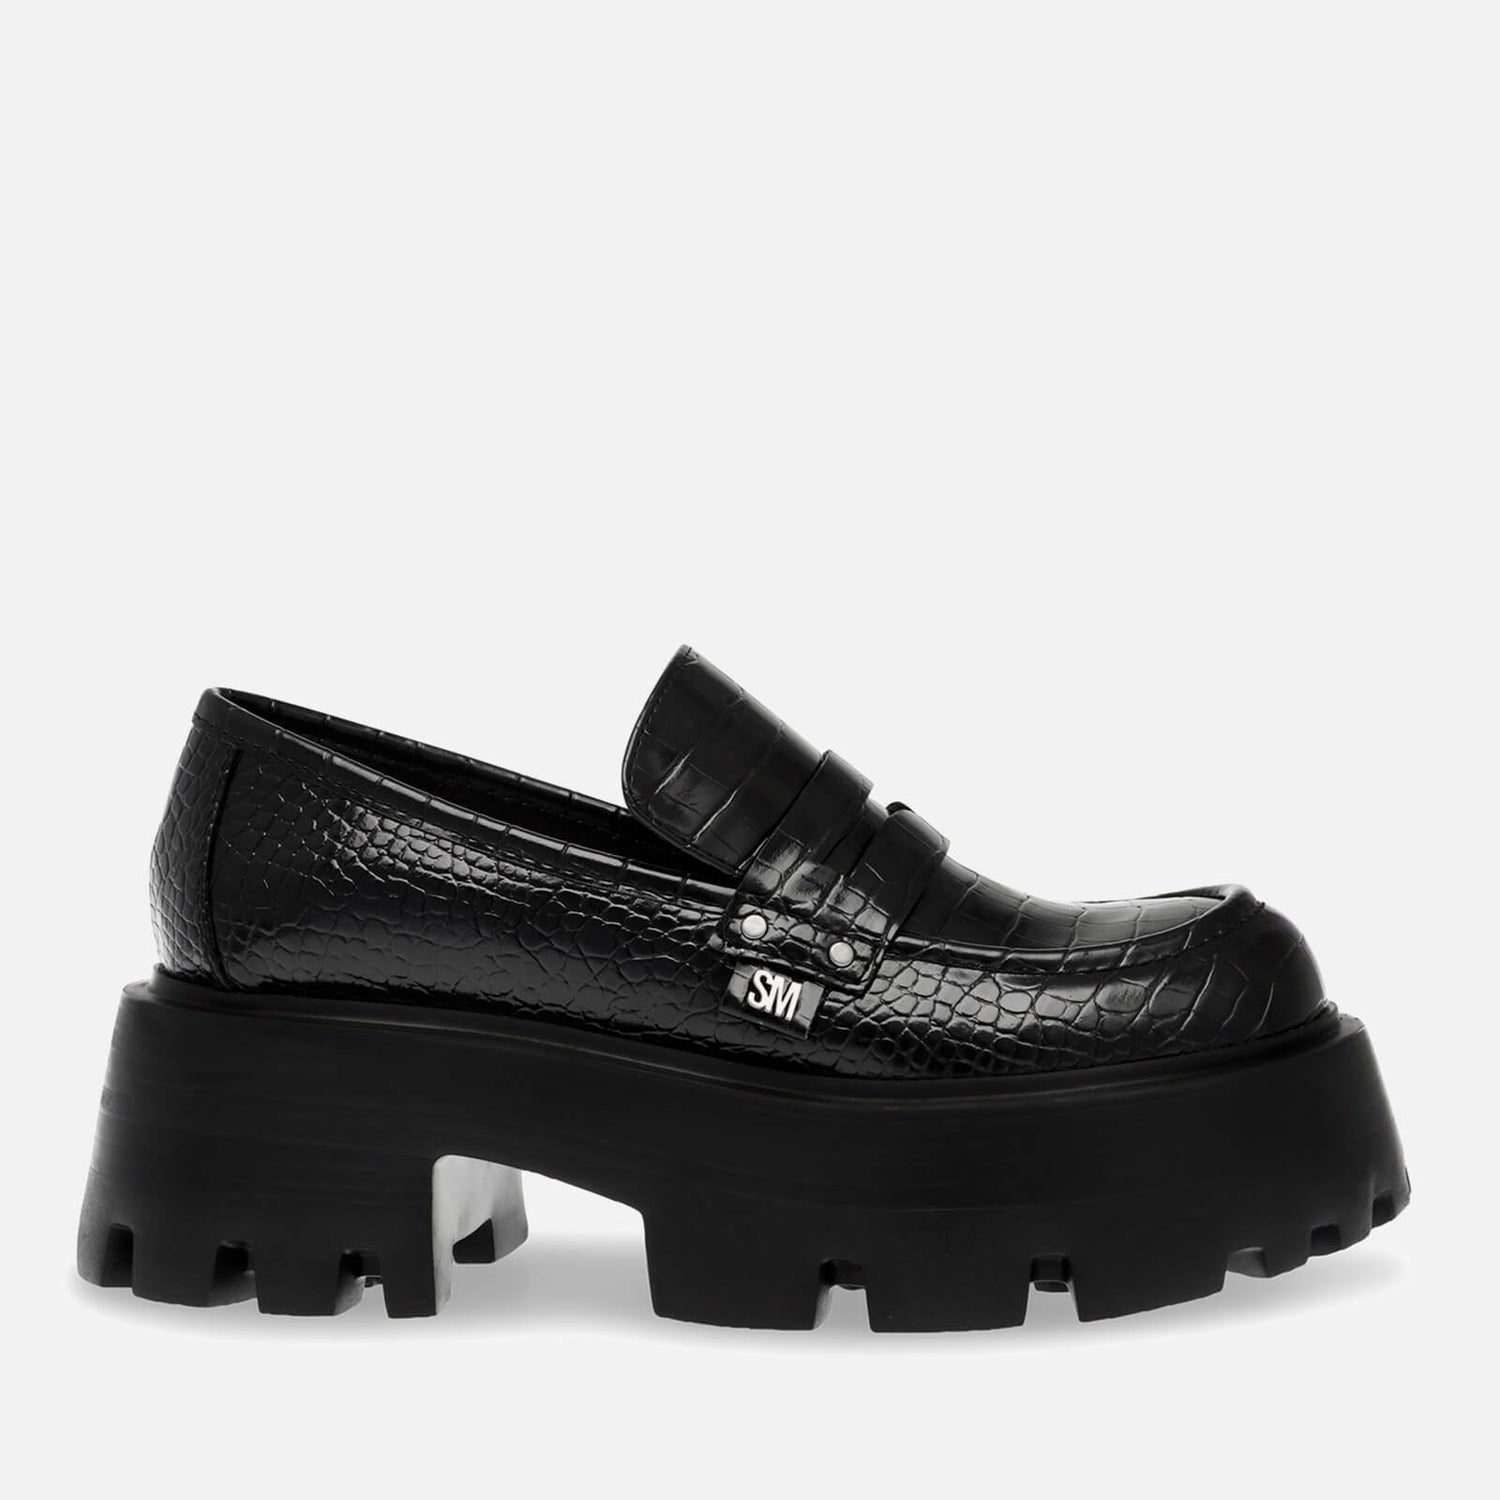 Steve Madden Women's Madlove Croco Faux Leather Loafers | TheHut.com